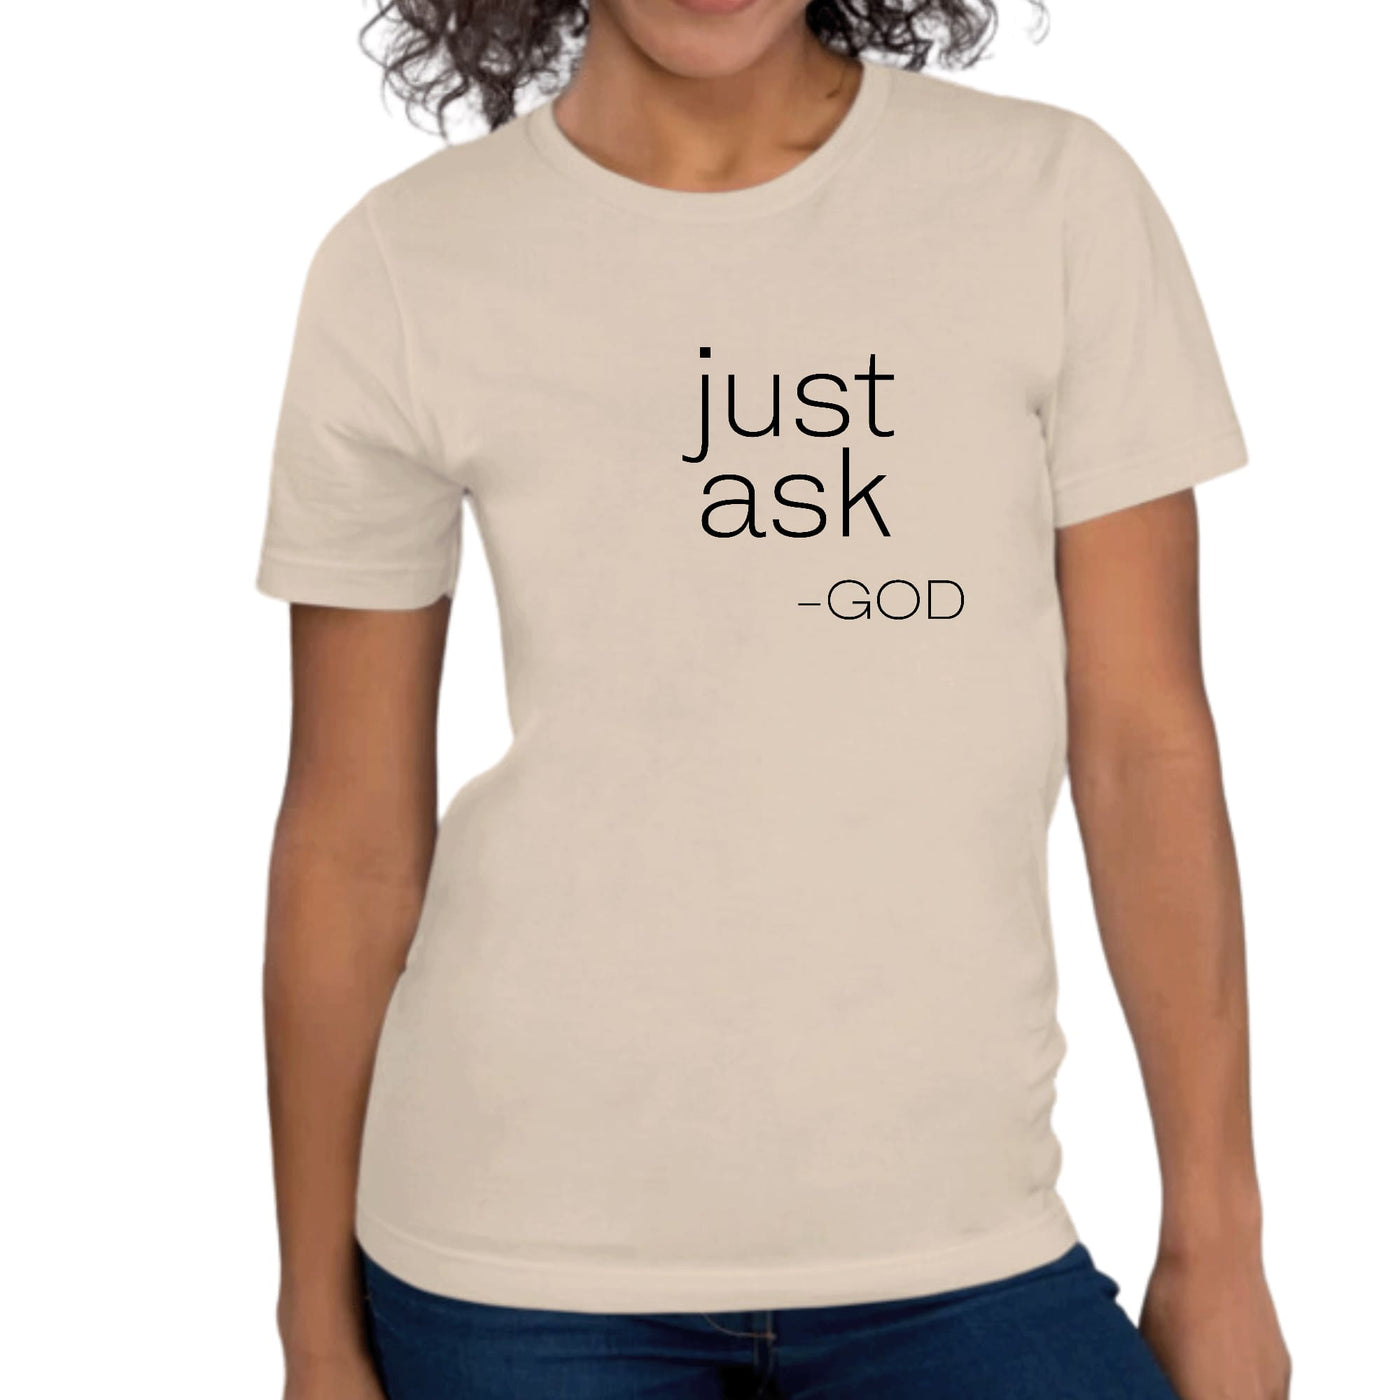 Womens Graphic T-shirt Say It Soul ’just Ask-god’ Statement Shirt, - Womens